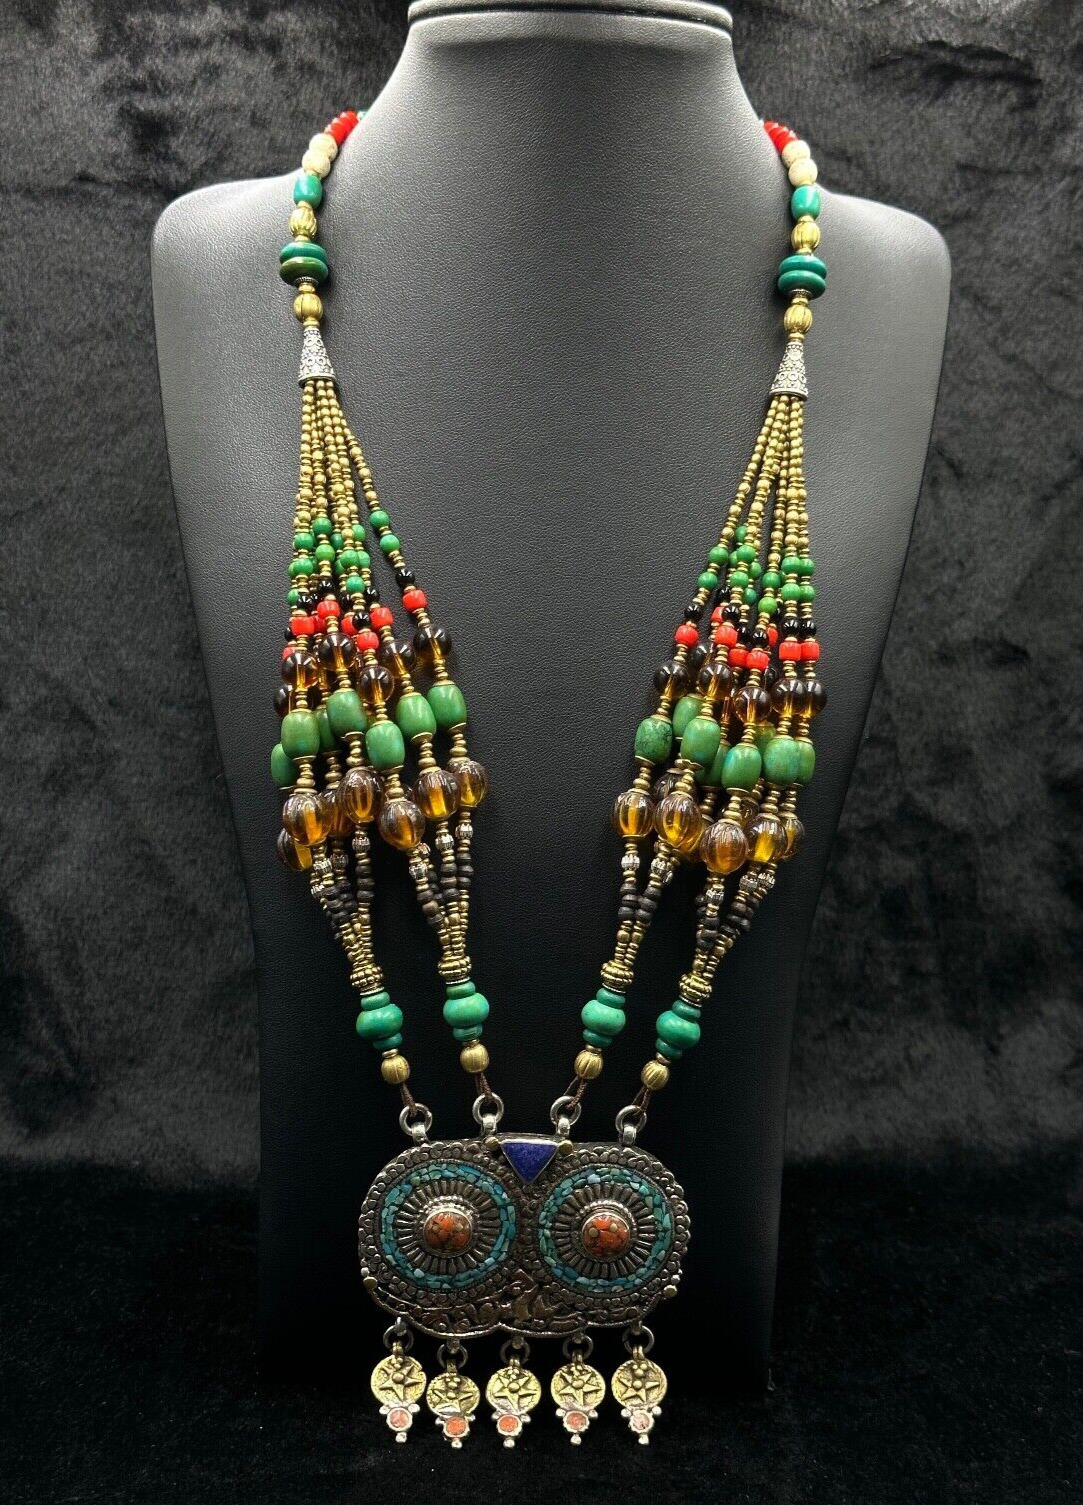 Unique Design Handmade Tibetan Old Necklace With Natural Turquoise & Coral Stone